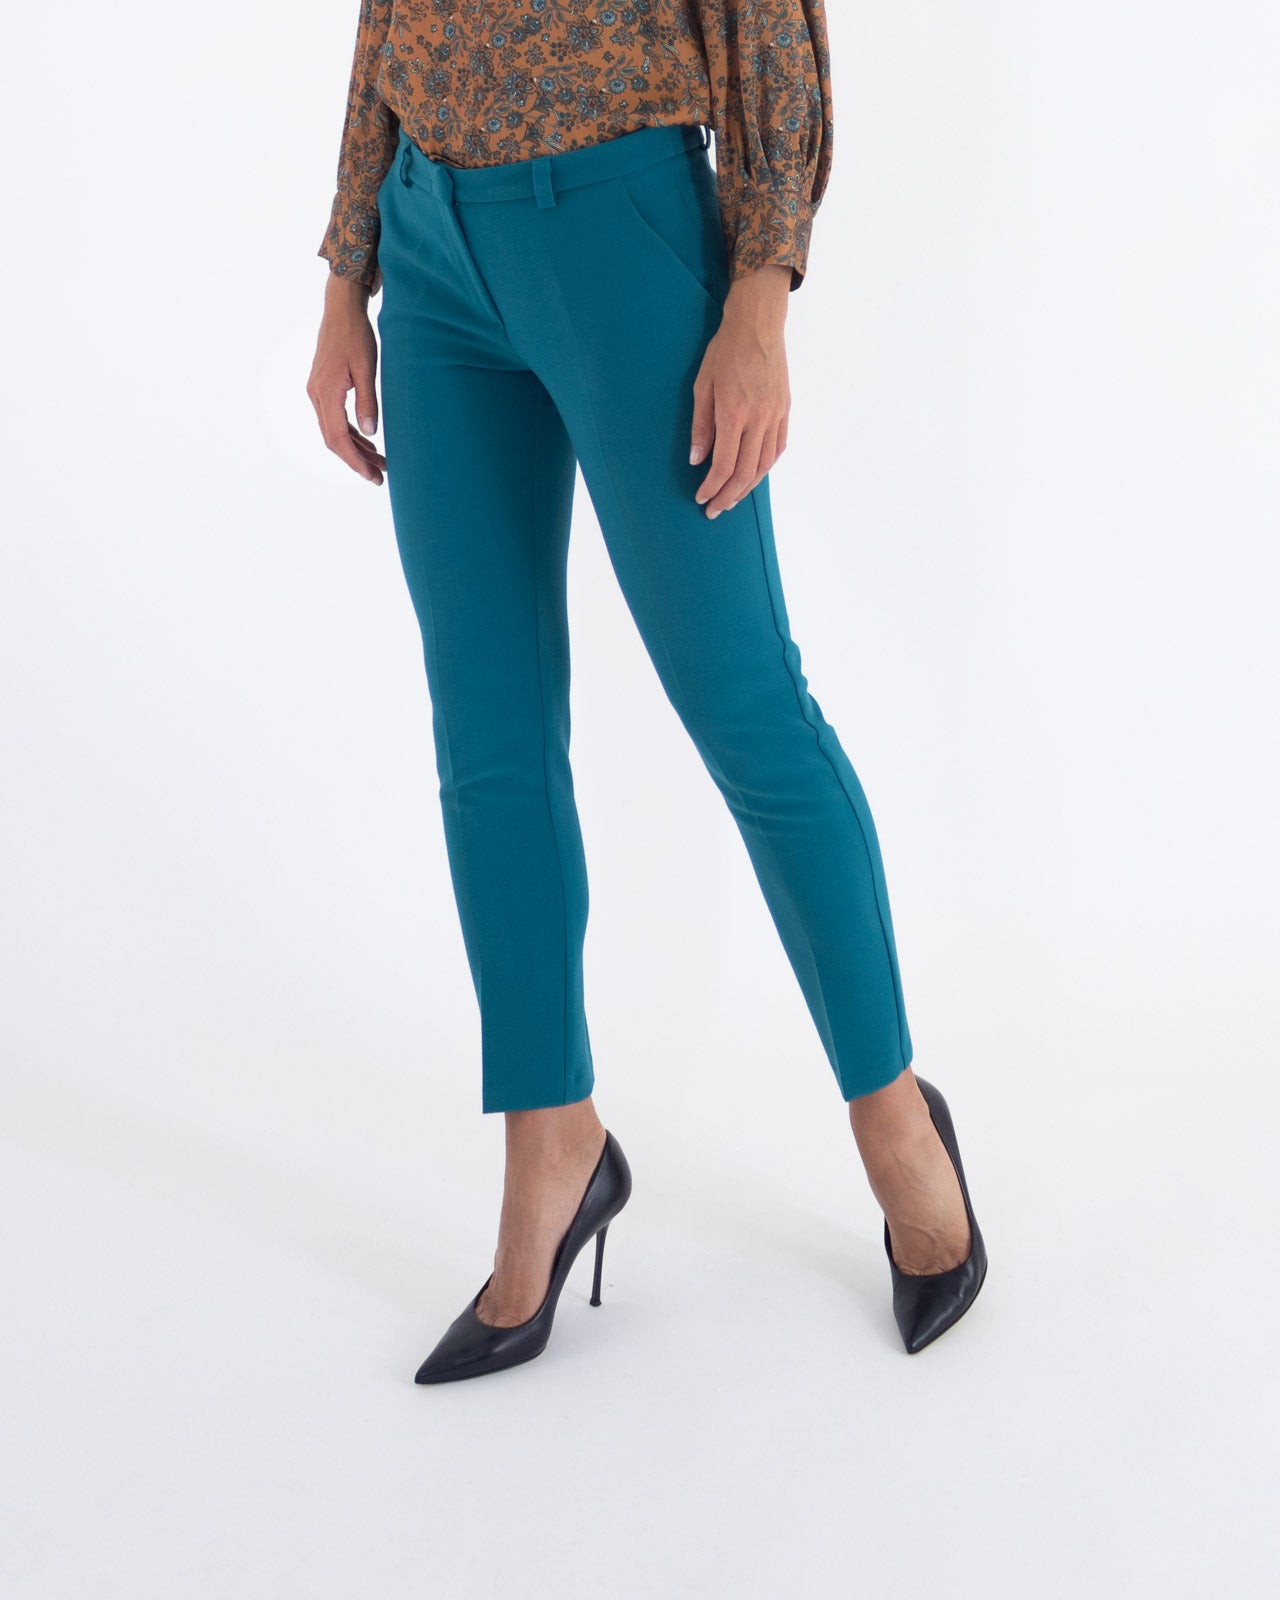 Tight teal trousers